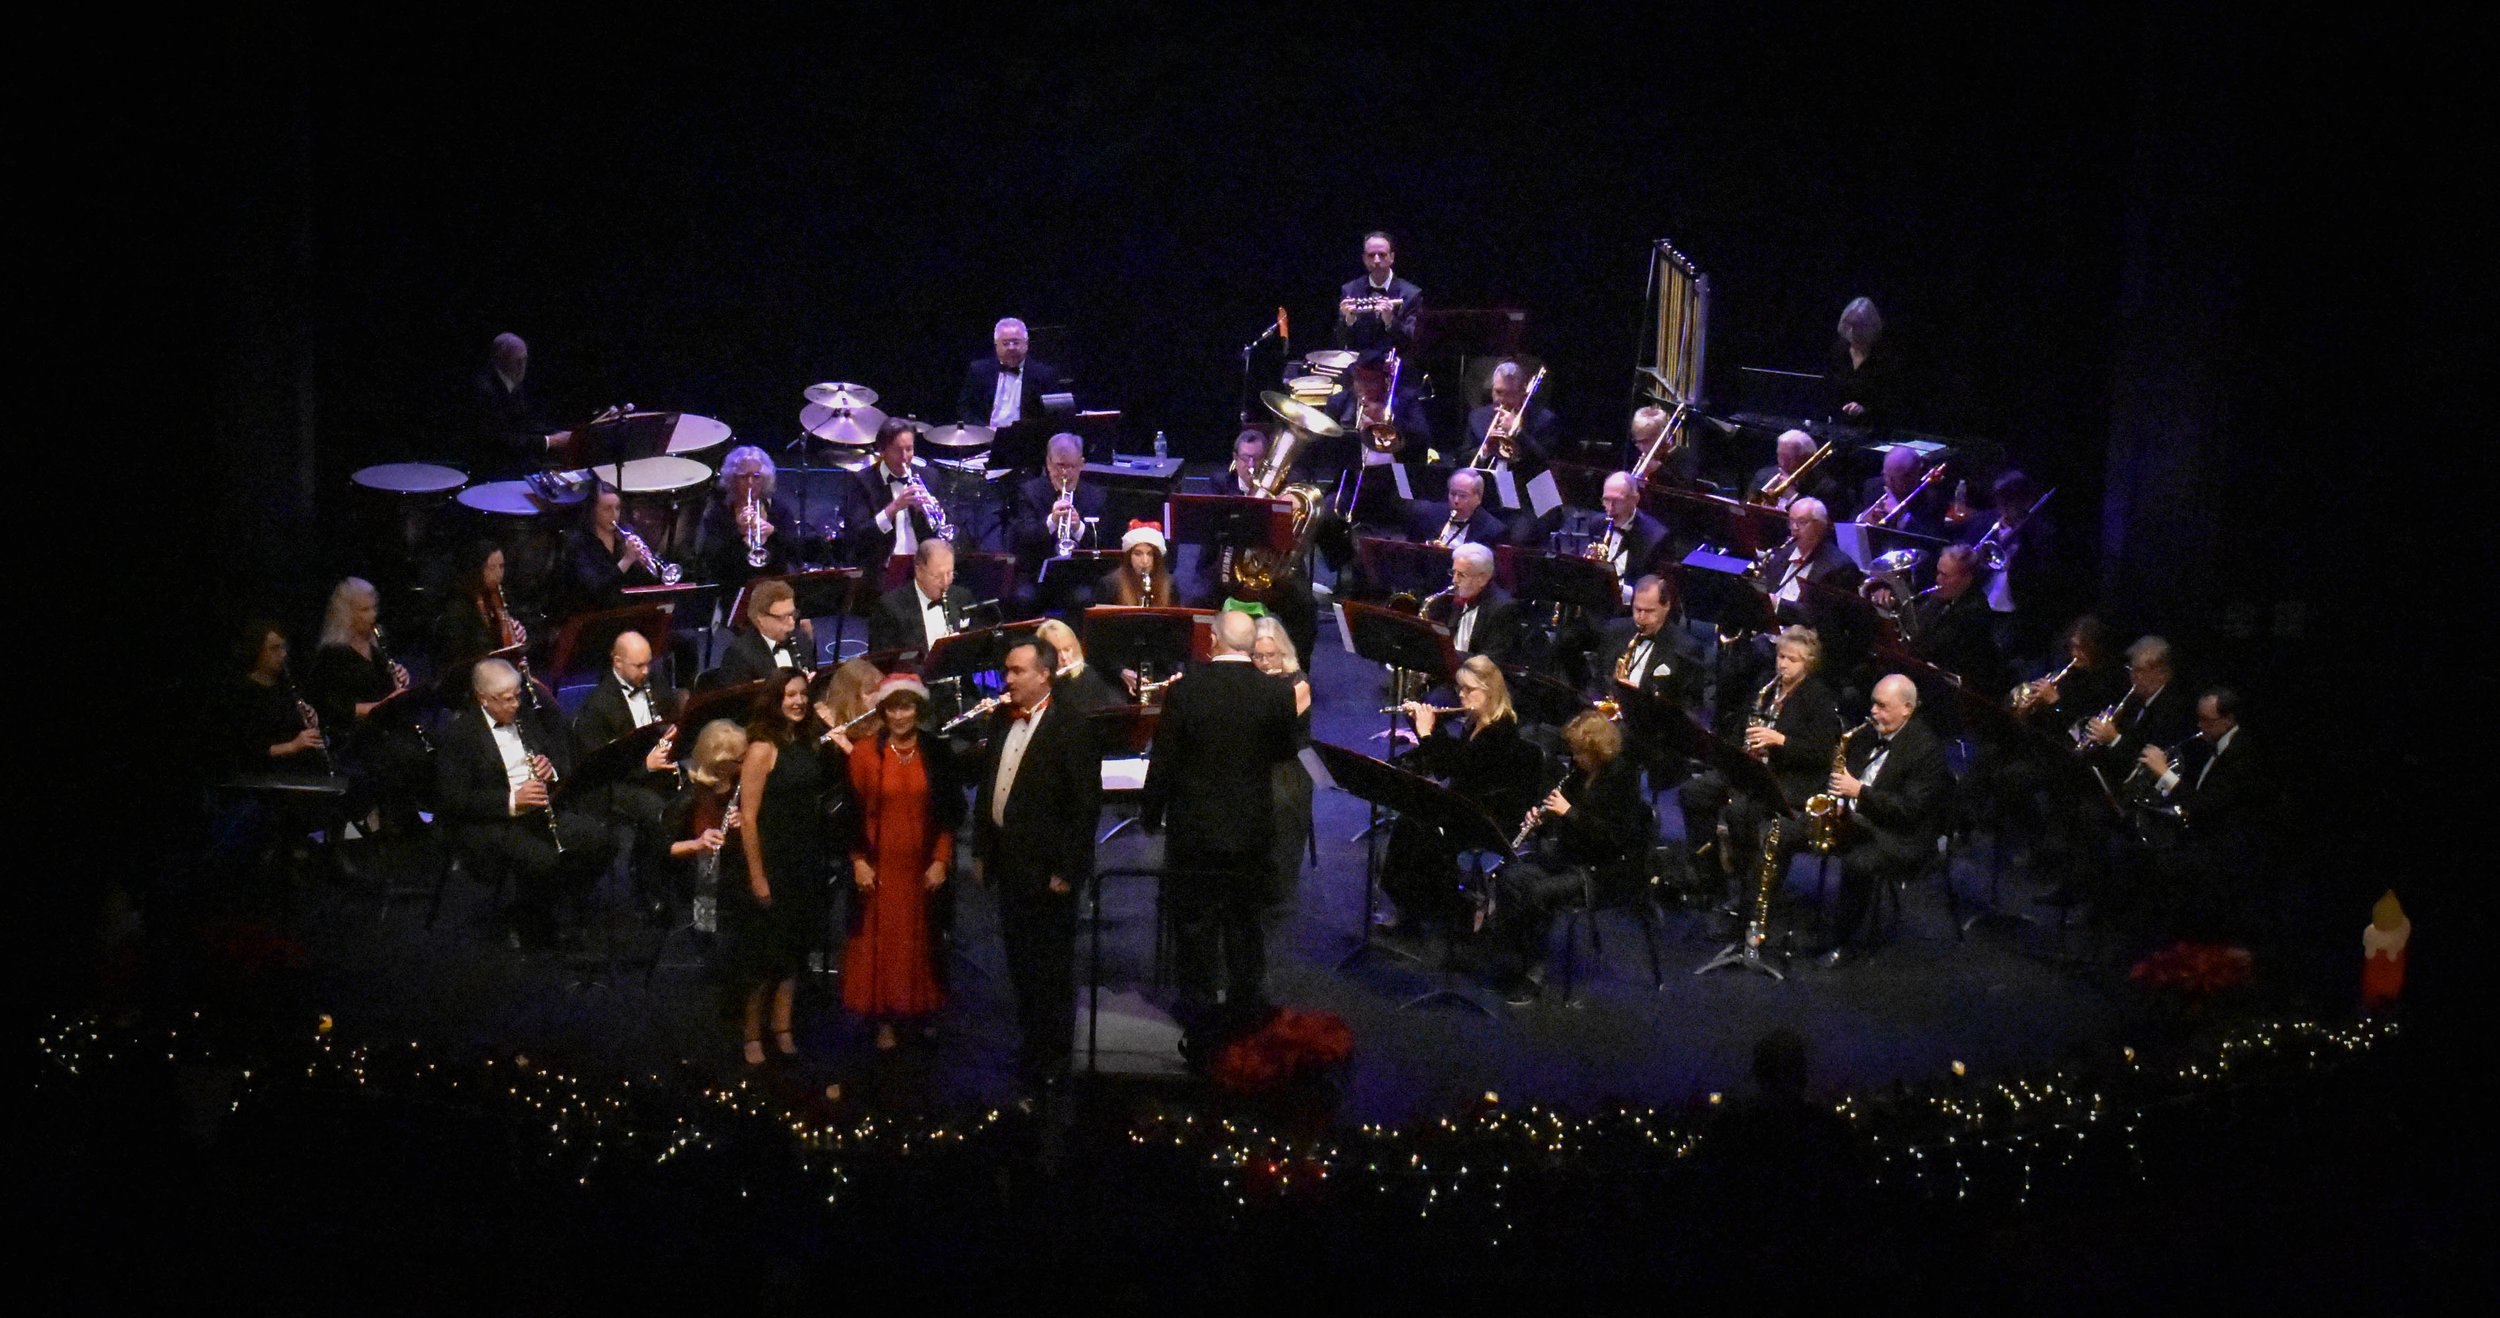 12-19-2021 LCB Holiday Concert by Peyton Webster79-34.jpg